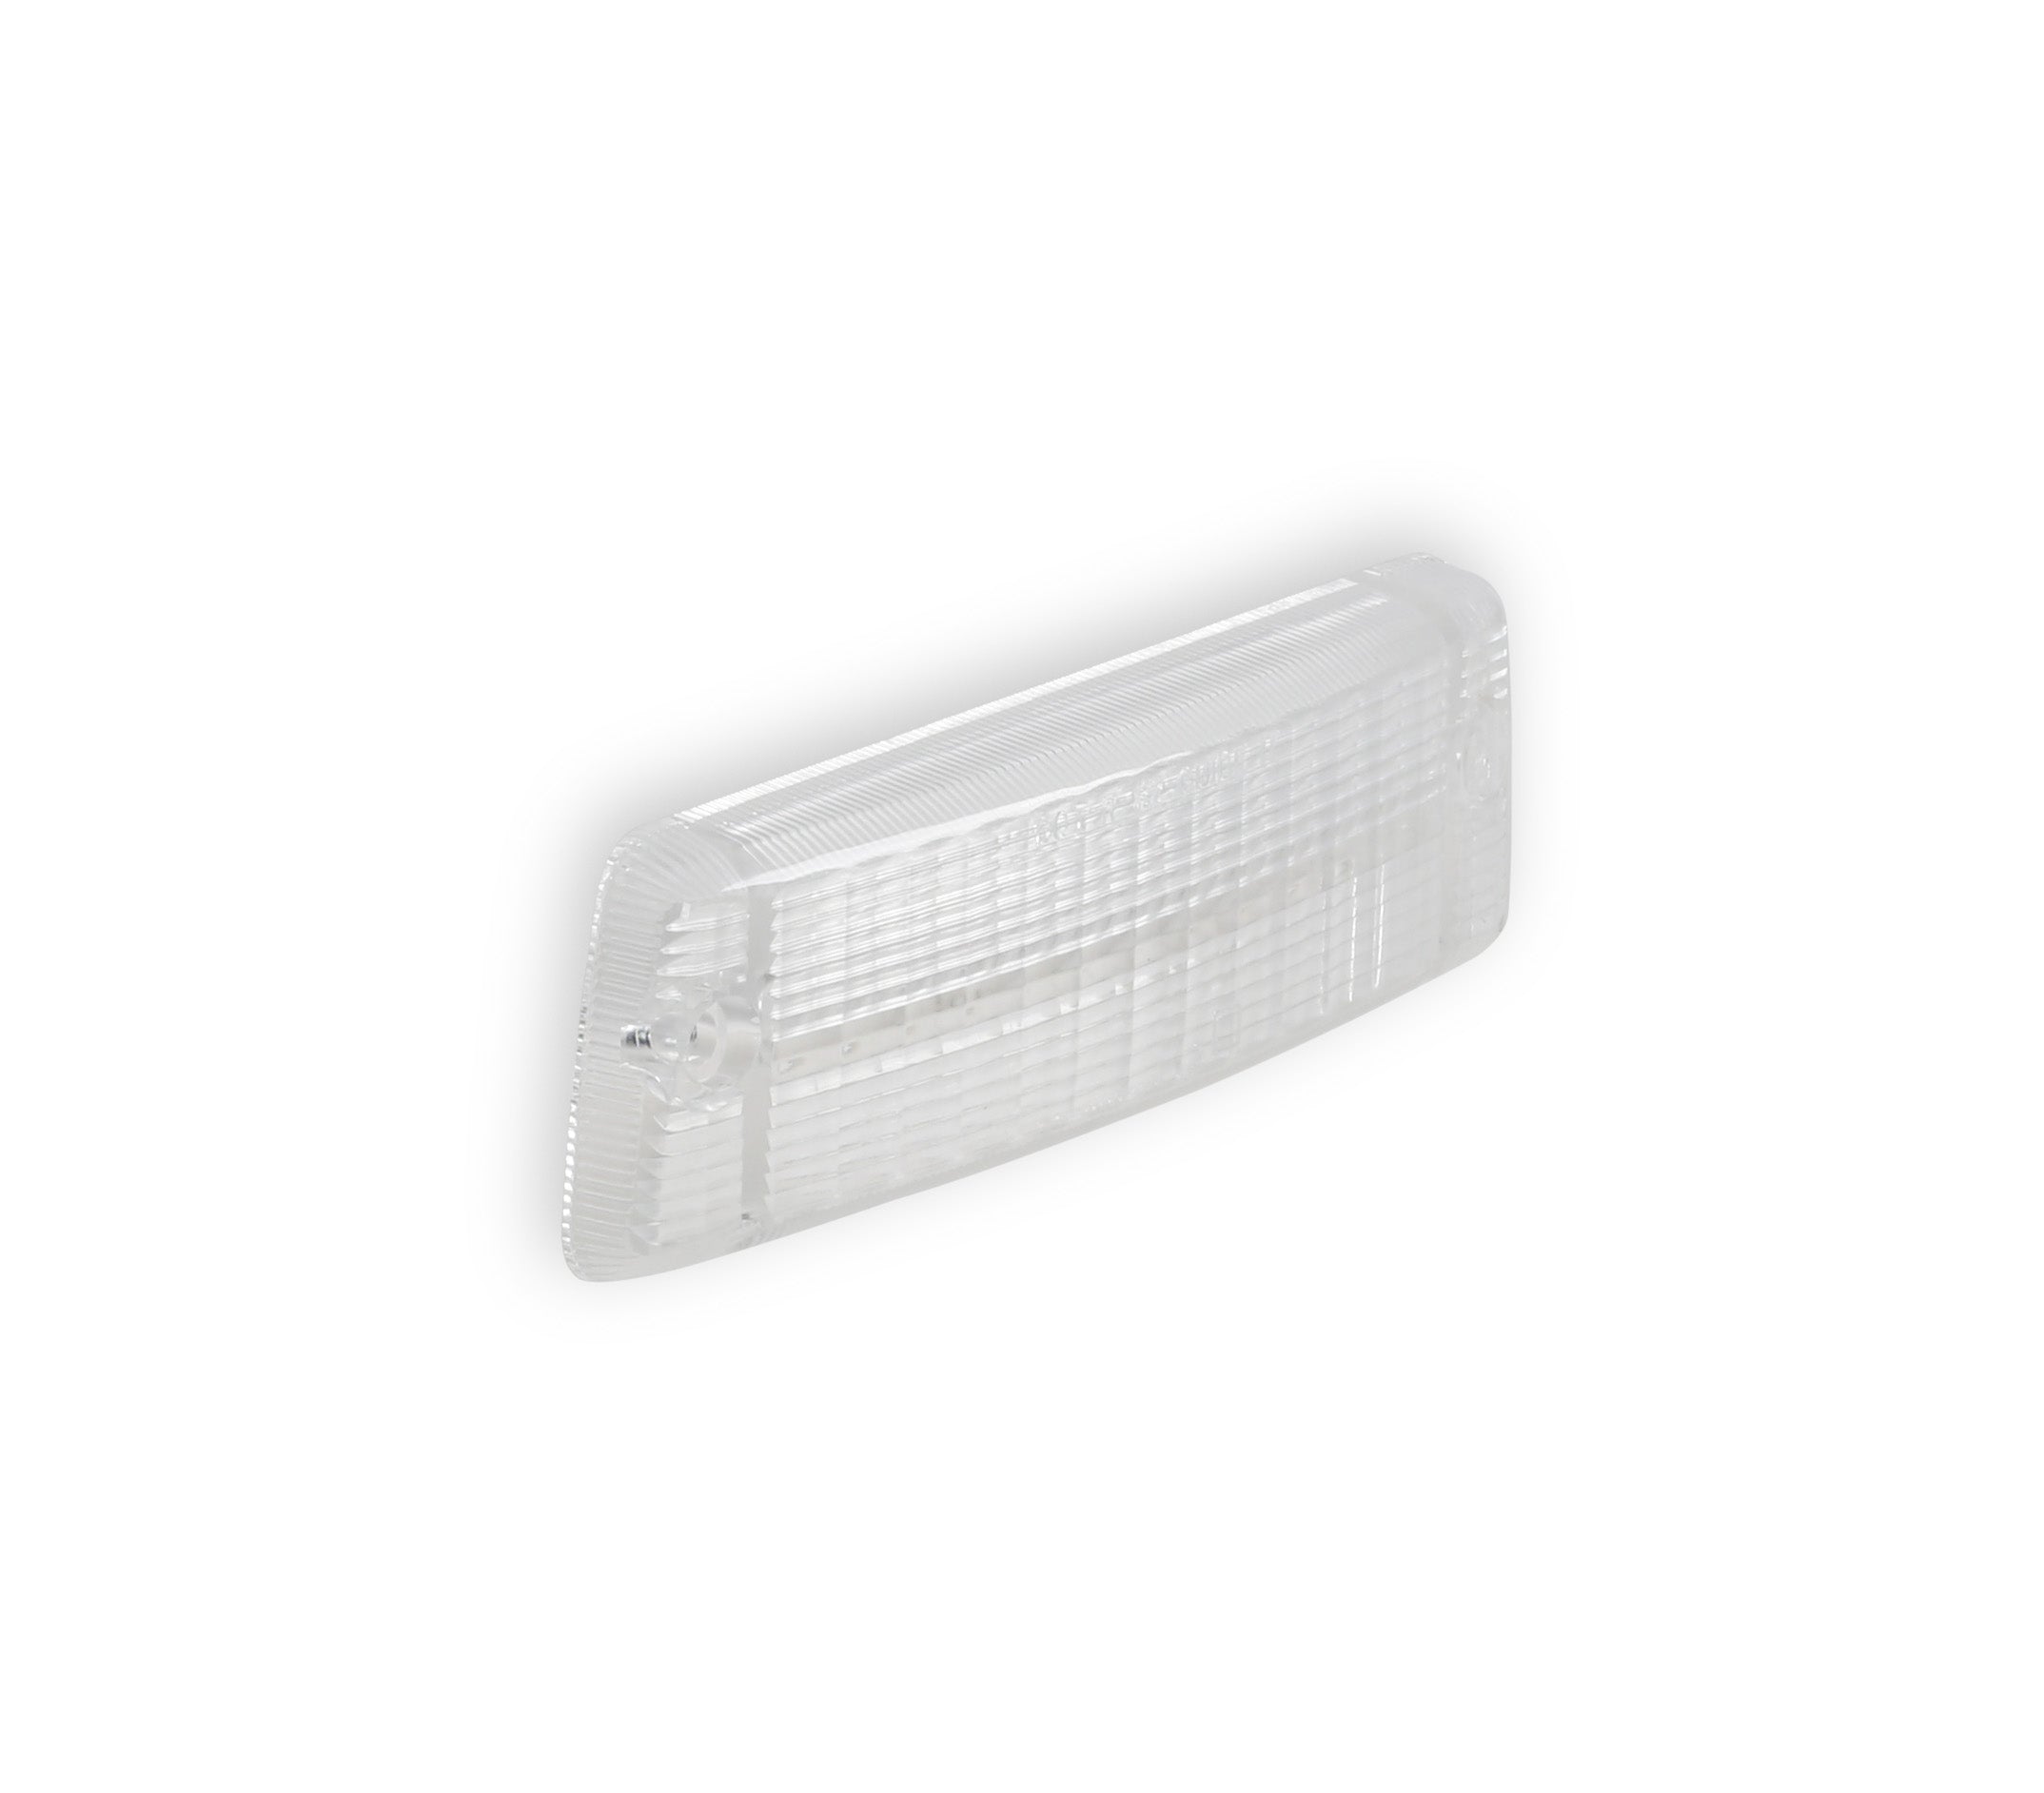 BROTHERS C/K Cargo Light Lens - Clear pn 07-143